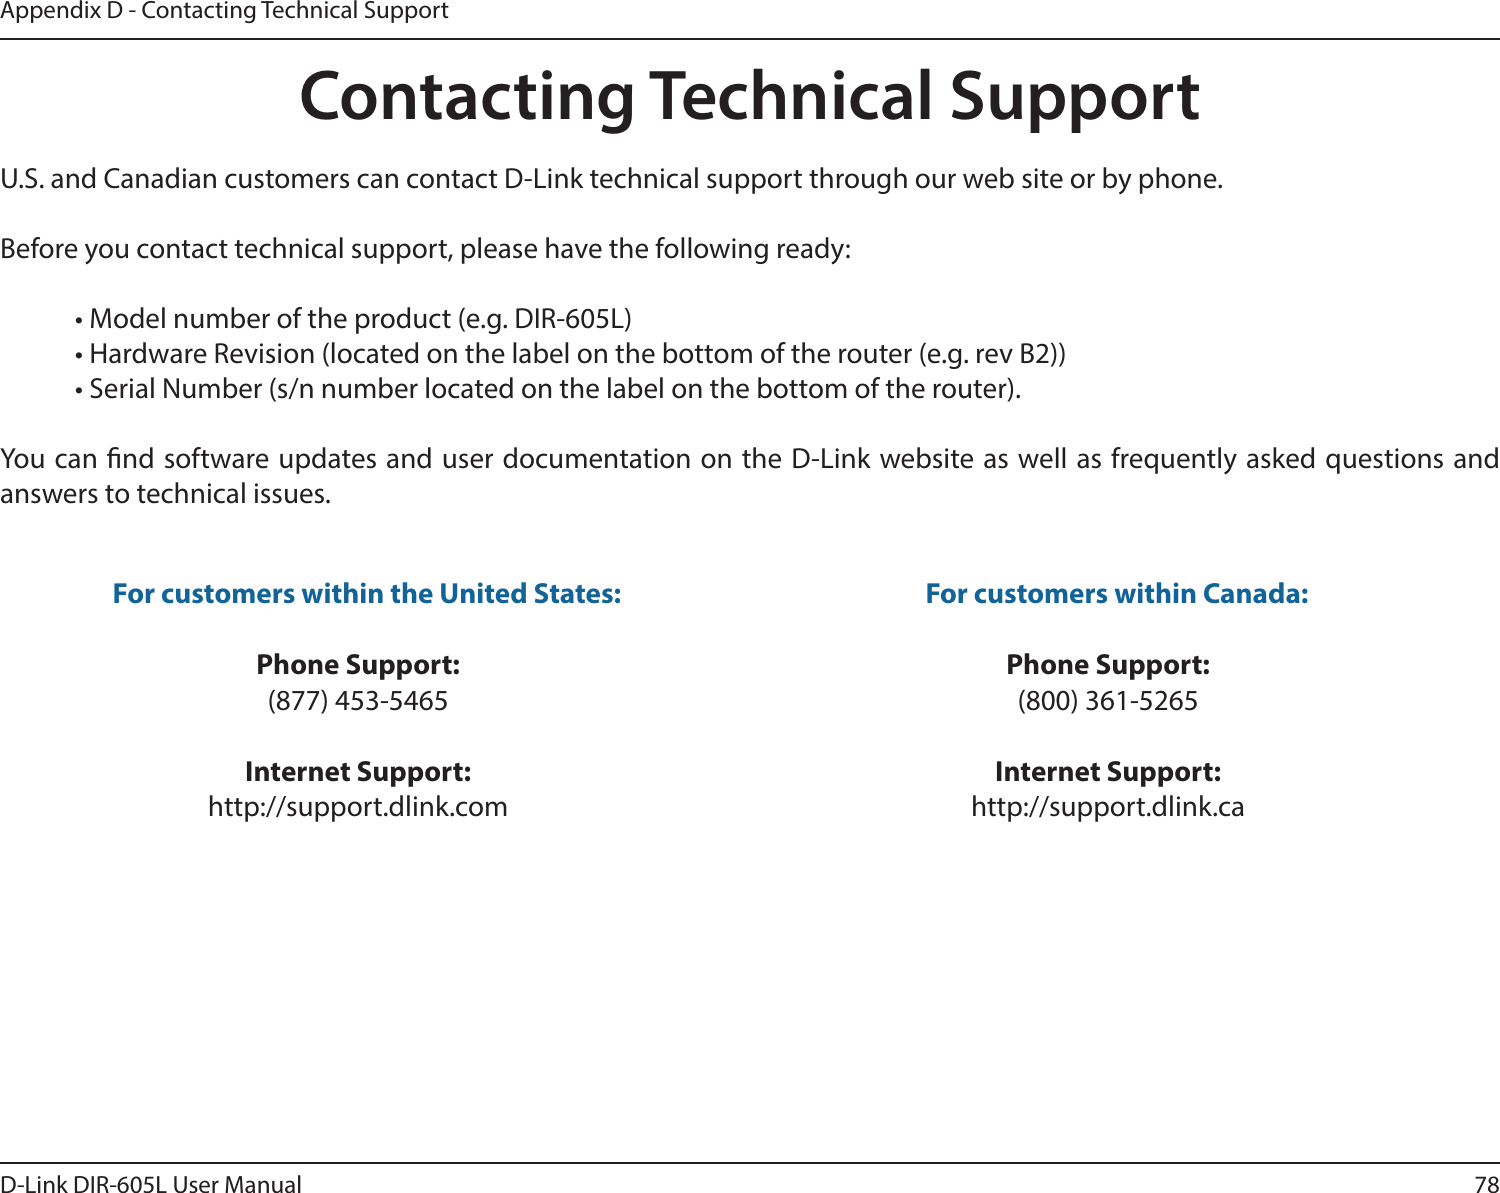 78D-Link DIR-605L User ManualAppendix D - Contacting Technical SupportContacting Technical SupportU.S. and Canadian customers can contact D-Link technical support through our web site or by phone.Before you contact technical support, please have the following ready:  • Model number of the product (e.g. DIR-605L)  • Hardware Revision (located on the label on the bottom of the router (e.g. rev B2))  • Serial Number (s/n number located on the label on the bottom of the router). You can nd software updates and user documentation on the D-Link website as well as frequently asked questions and answers to technical issues.For customers within the United States: Phone Support:(877) 453-5465Internet Support:http://support.dlink.com For customers within Canada: Phone Support:(800) 361-5265Internet Support:http://support.dlink.ca 